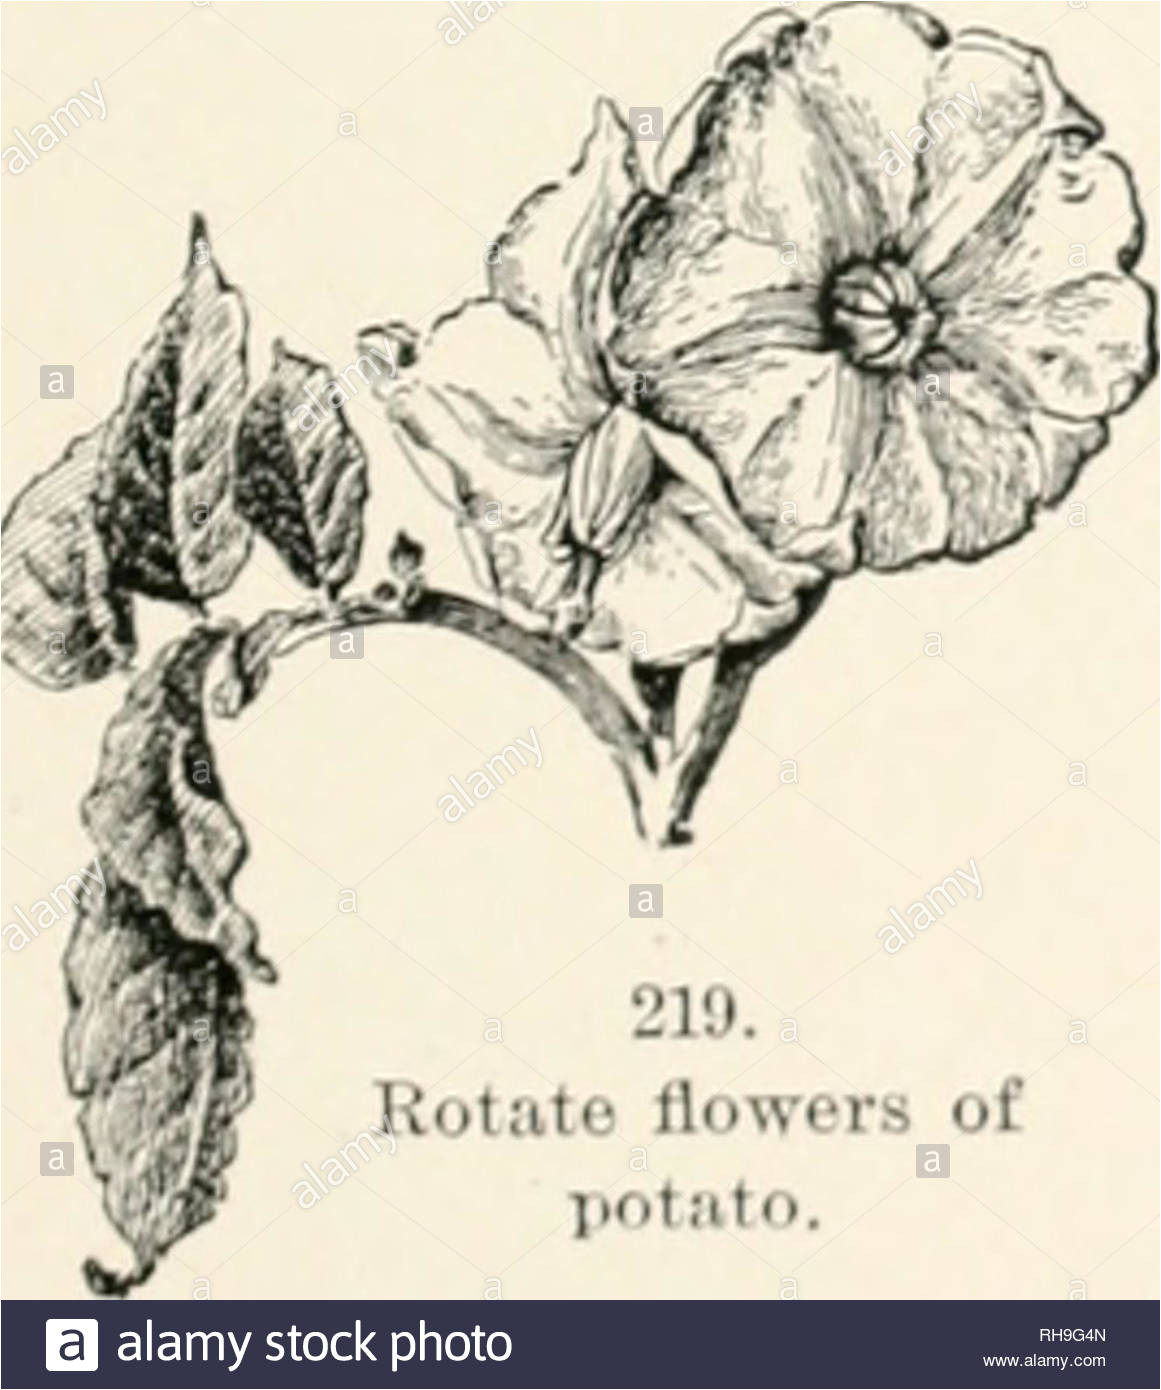 botany an elementary text for schools botany quot217 truiupet shiiirhl flower of momiiijiglory kotito flowers of gtotito notched or toothed in 5 merous flowers the lower lip is usuall 3 lobed and the upper one 2 lobed labirte flowers are char acteristic of the mint family fig 197 and the family therefore is called the labiata propeily labi ate means merely lipped without specifying the number of lips or lobes gtiit it is commonly used to iualc quot lipiiiml llsci s strtiil paild polypctalous llowers maybe aid to belaliiate liit the te rh9g4n jpg